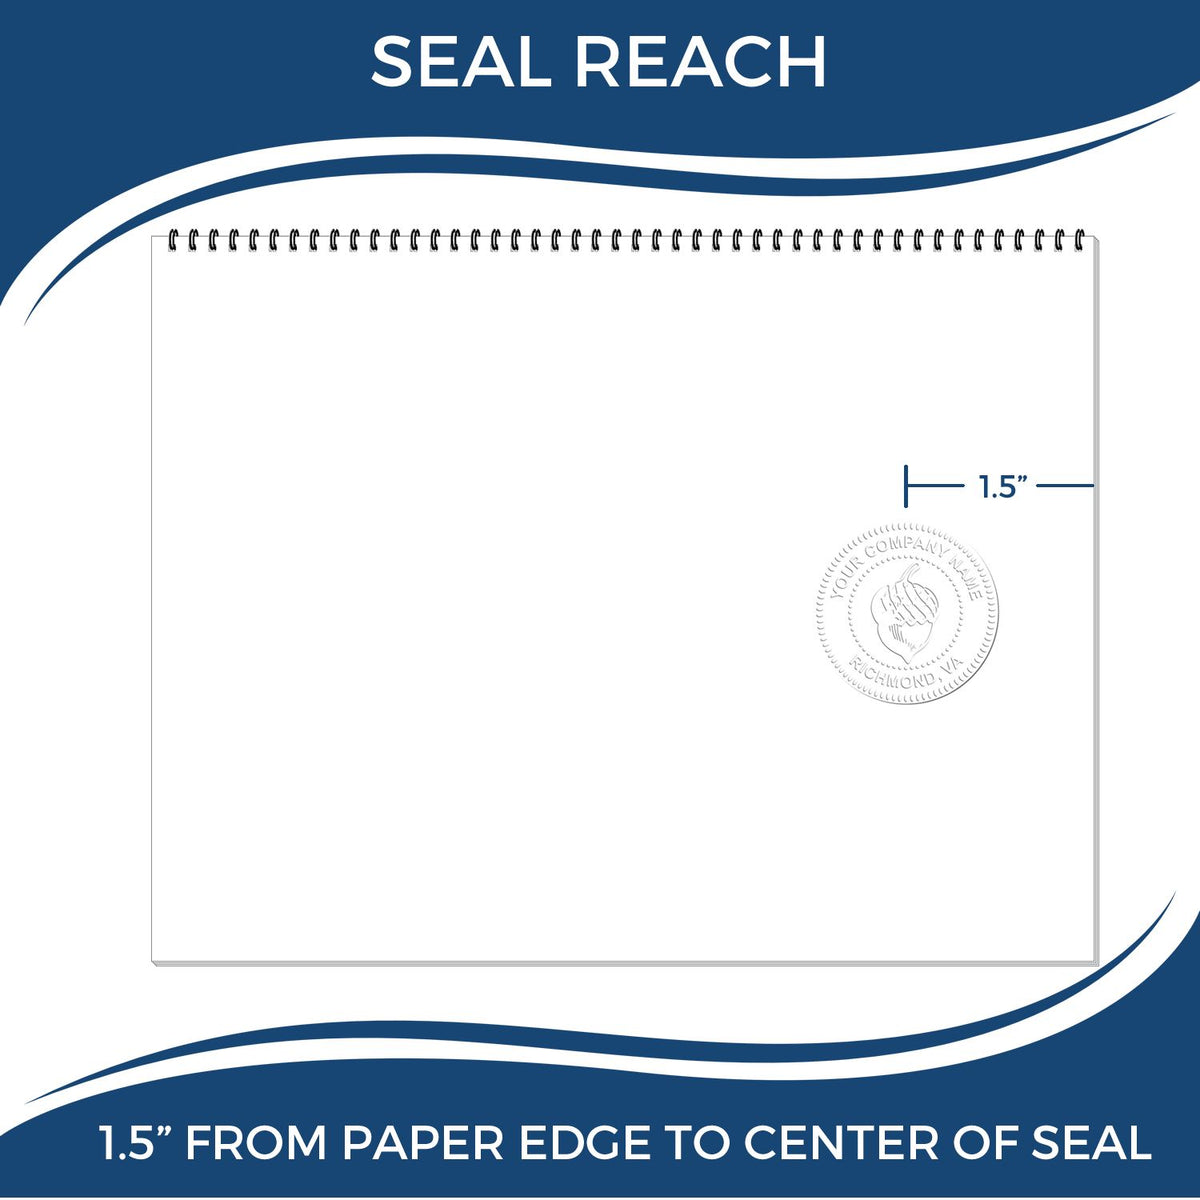 An infographic showing the seal reach which is represented by a ruler and a miniature seal image of the Gift Virginia Landscape Architect Seal